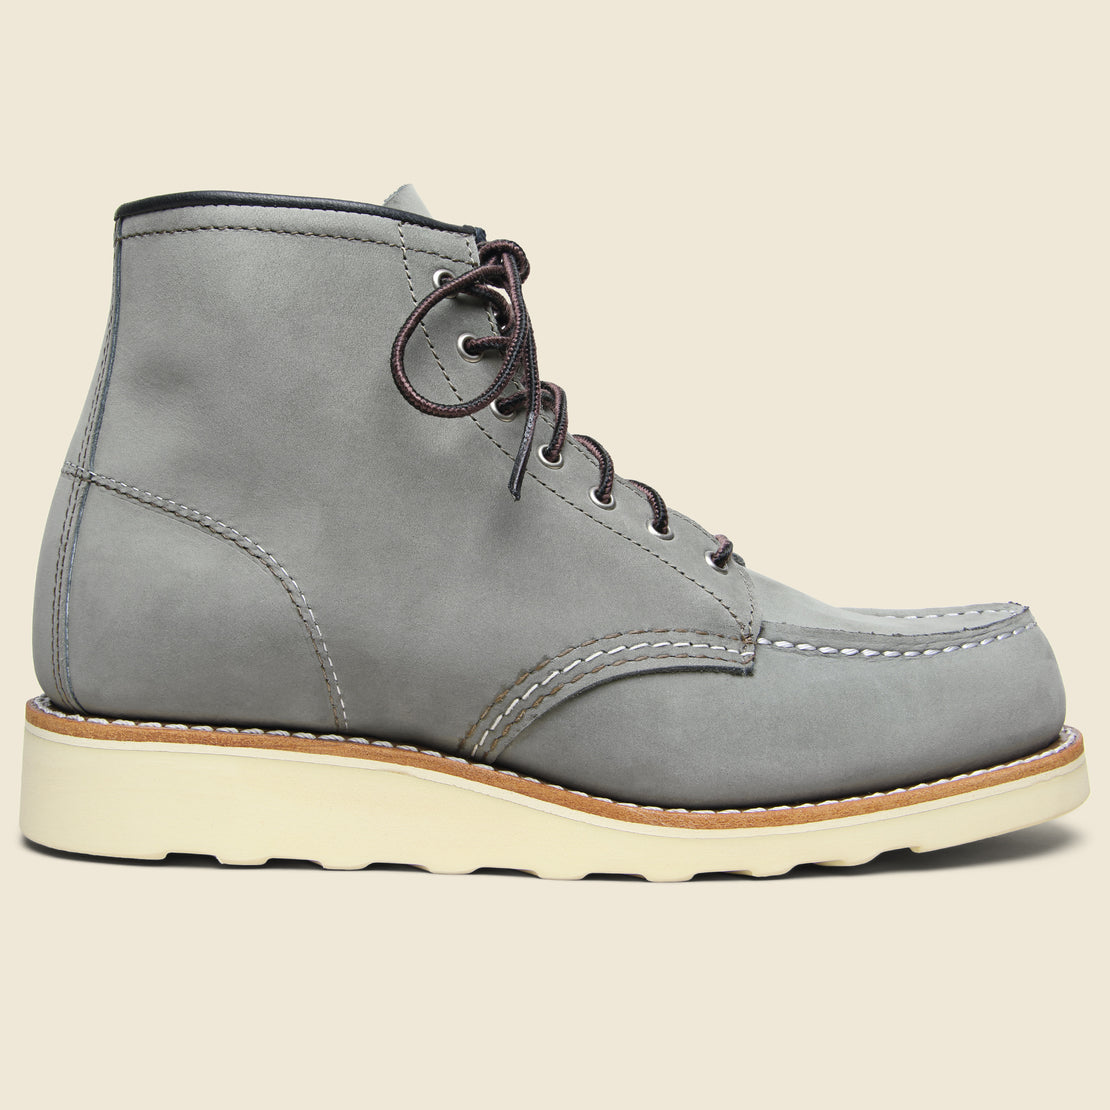 Red Wing 6" Moc Toe No. 3370 - Charcoal Chinook